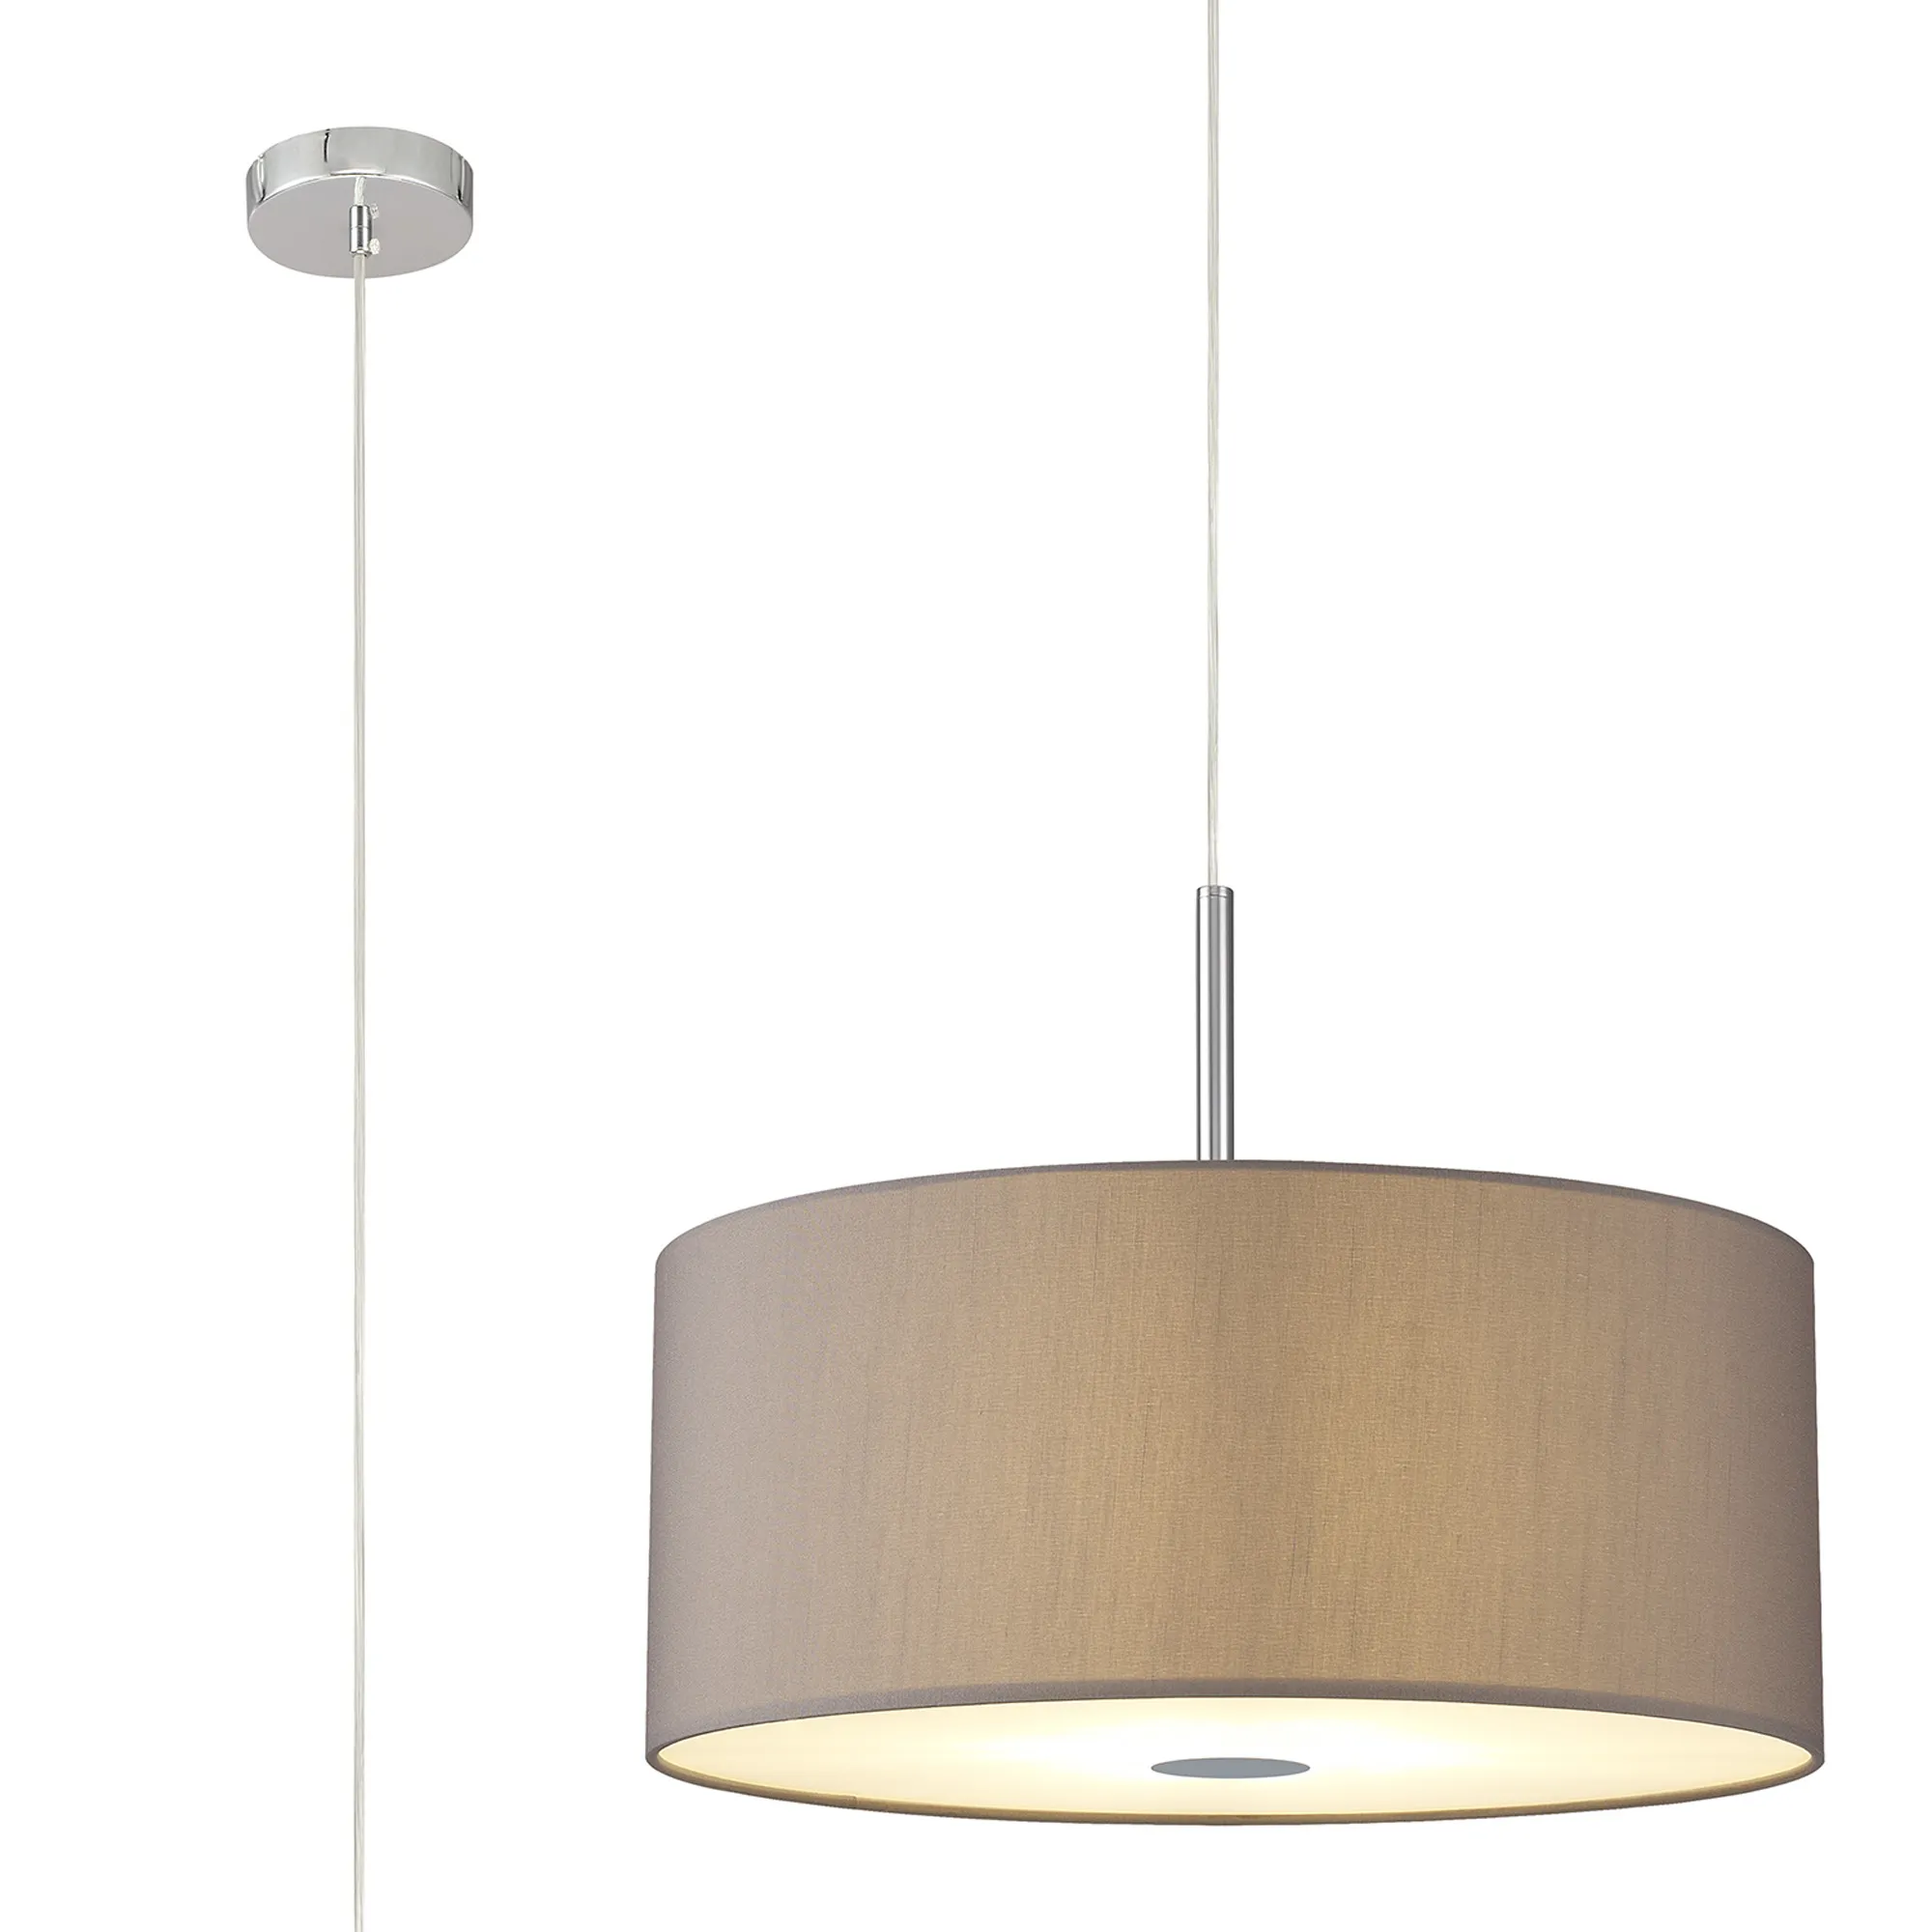 Baymont 60cm 5 Light Pendant Polished Chrome; Grey/White; Frosted Diffuser